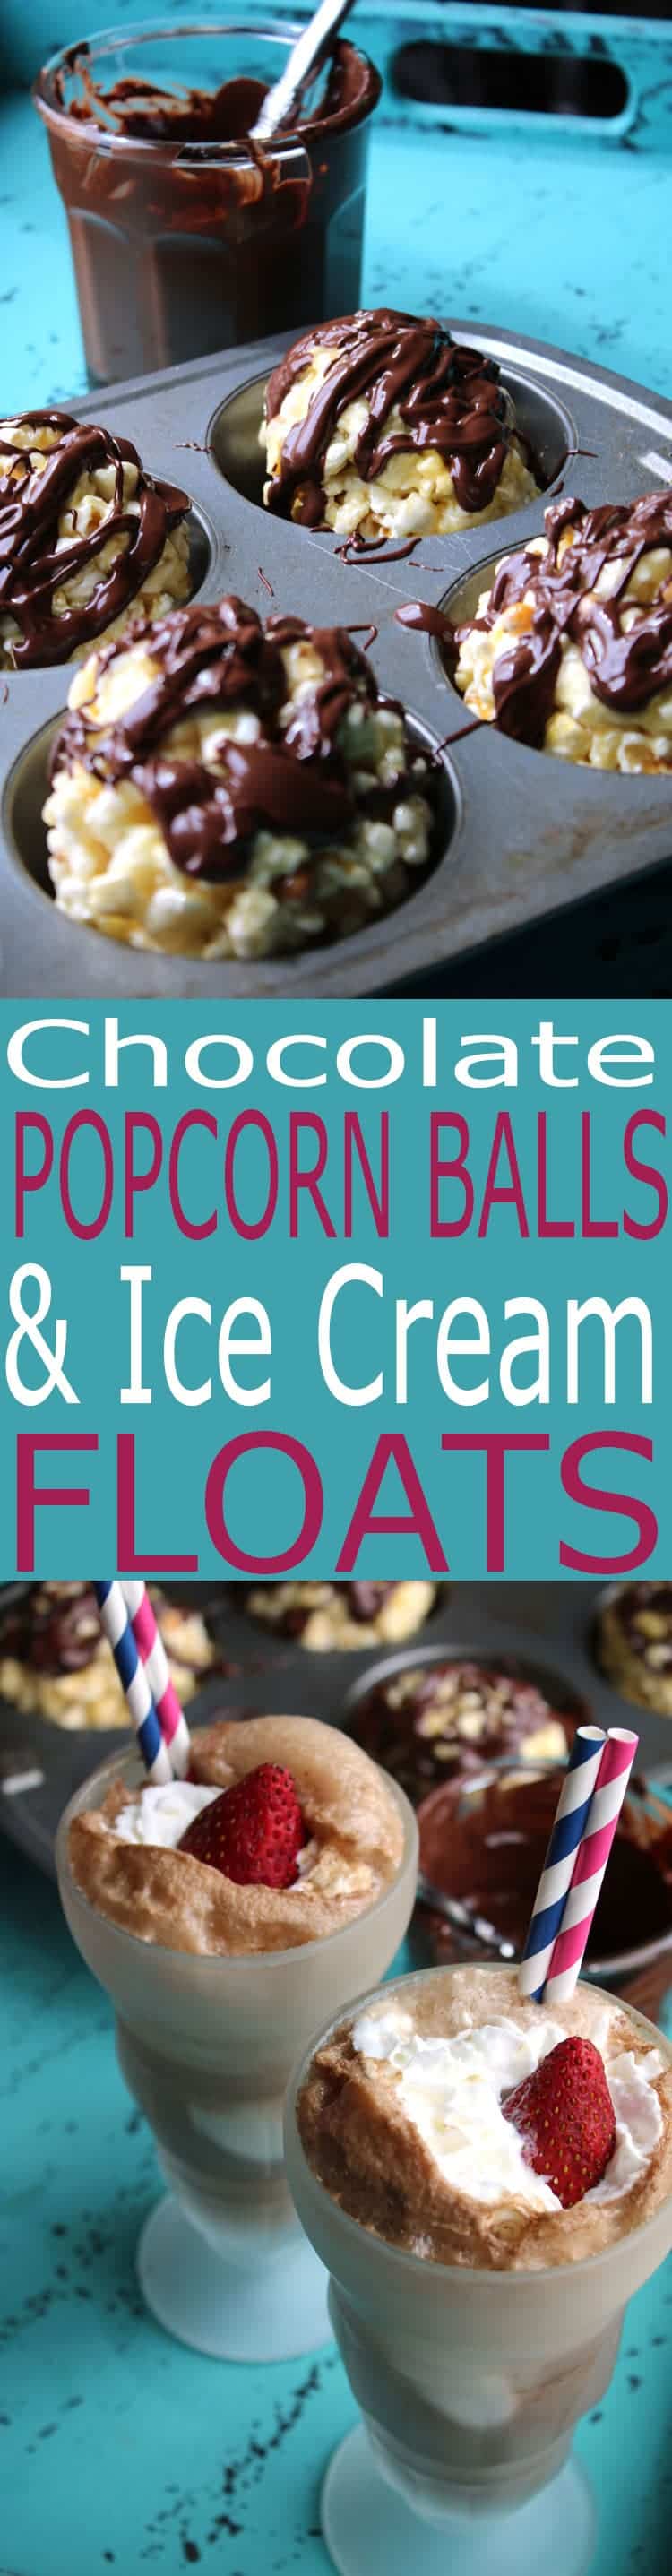 You'll love these Chocolate Popcorn Balls and Ice Cream Floats. Chocolate Popcorn Balls are a quick snack and so delicious.